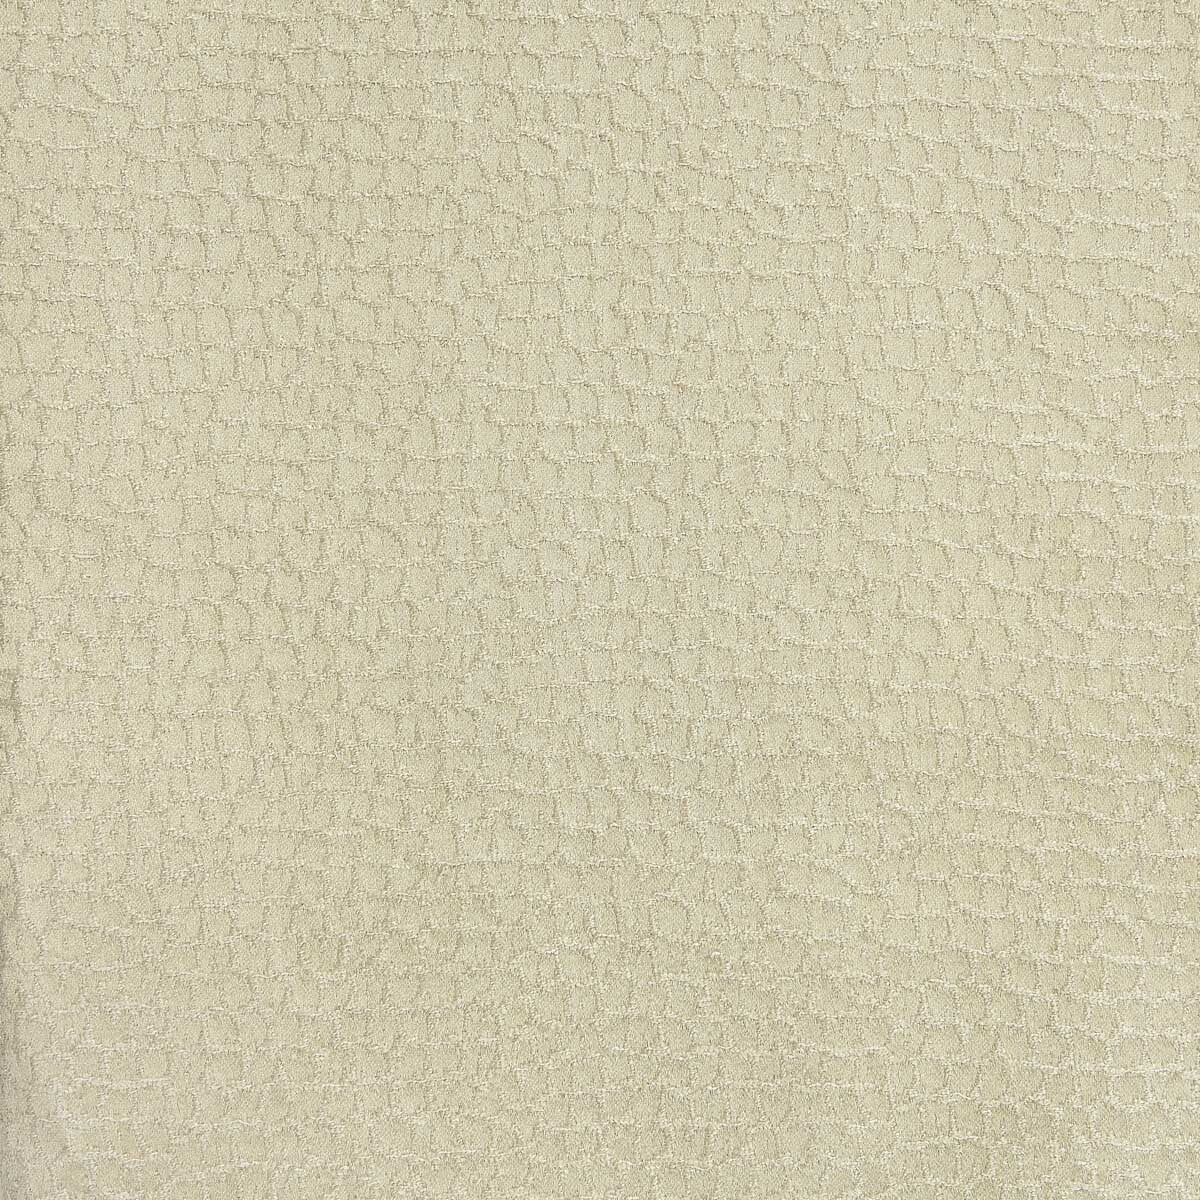 Gaudi fabric in 6 color - pattern LZ-30410.06.0 - by Kravet Couture in the Lizzo collection